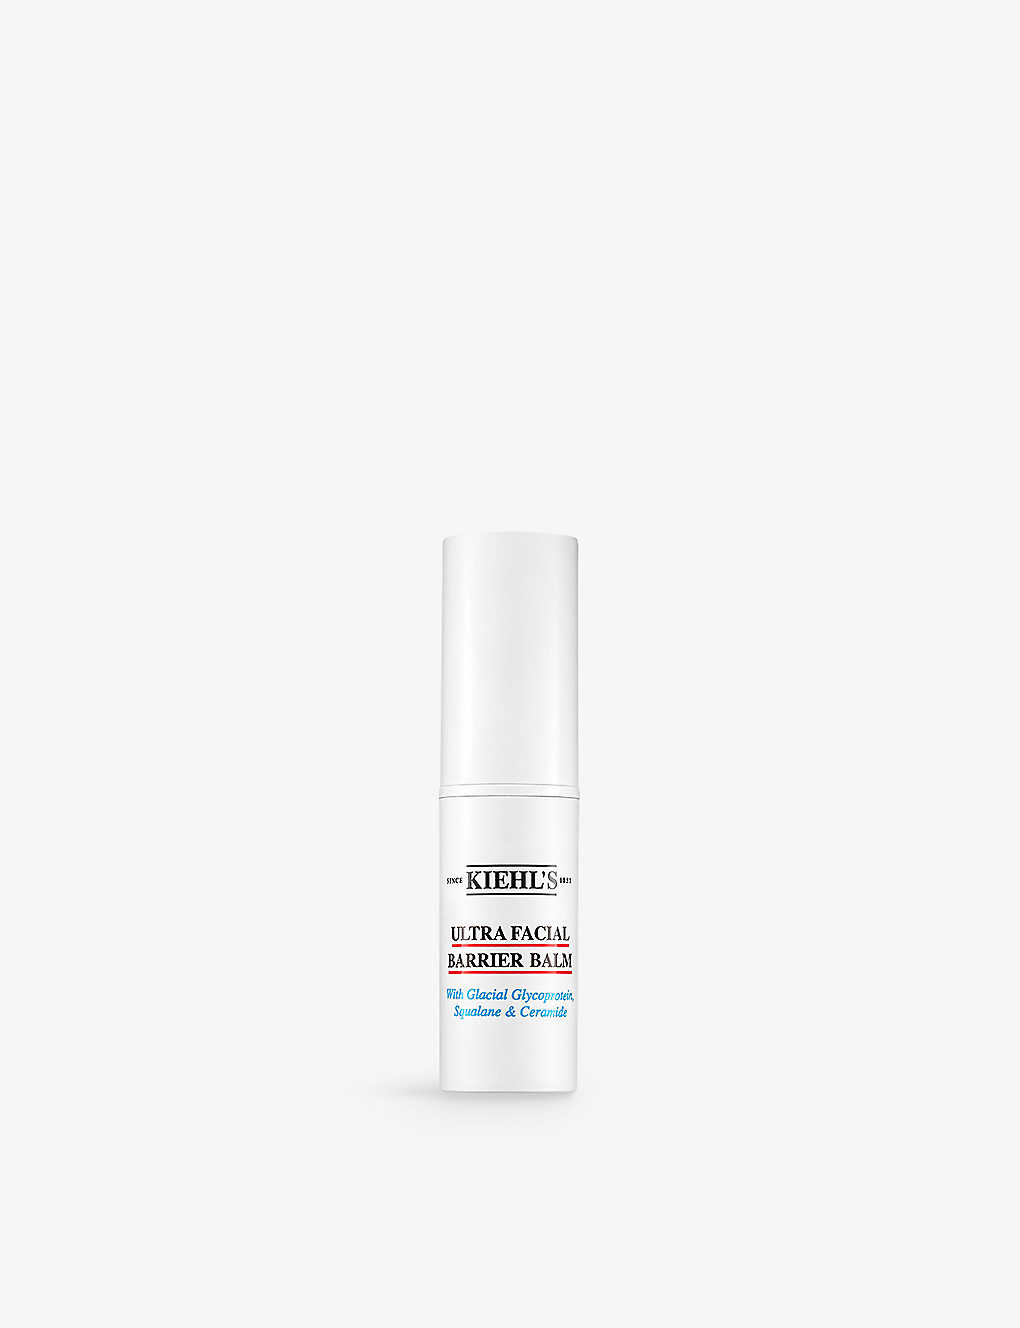 Kiehl's Since 1851 Ultra Facial Barrier Balm 9g In White